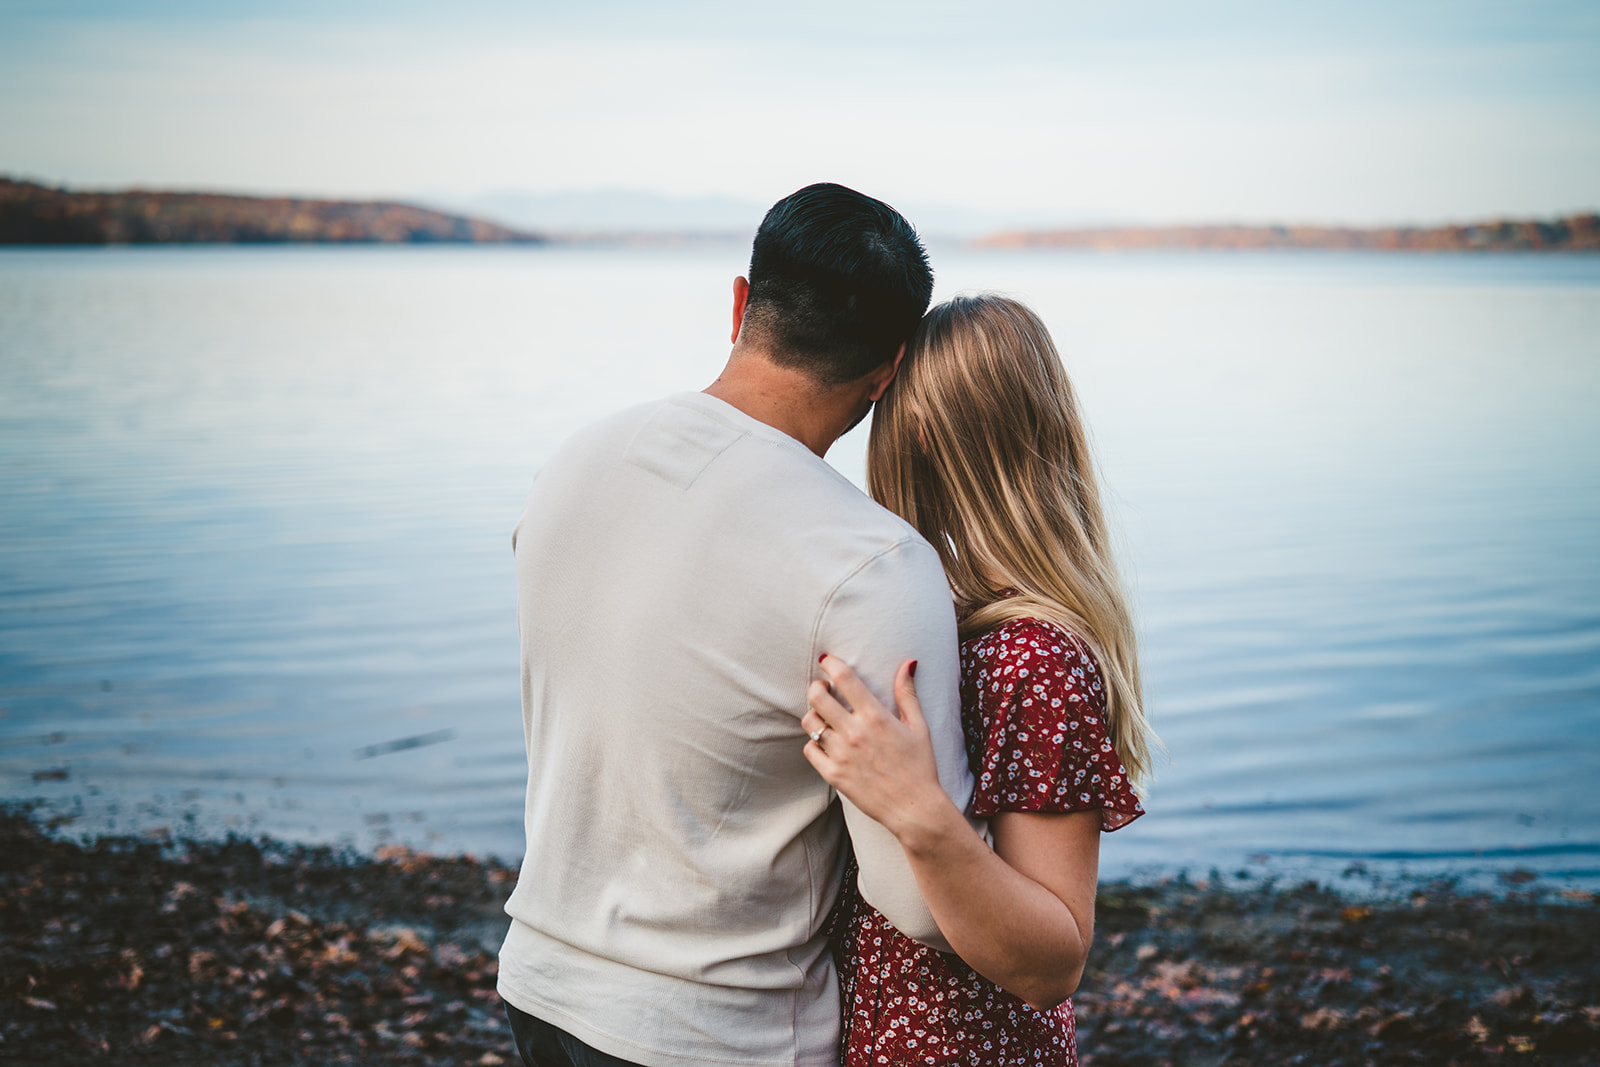 Engagement photography in the Hudson valley